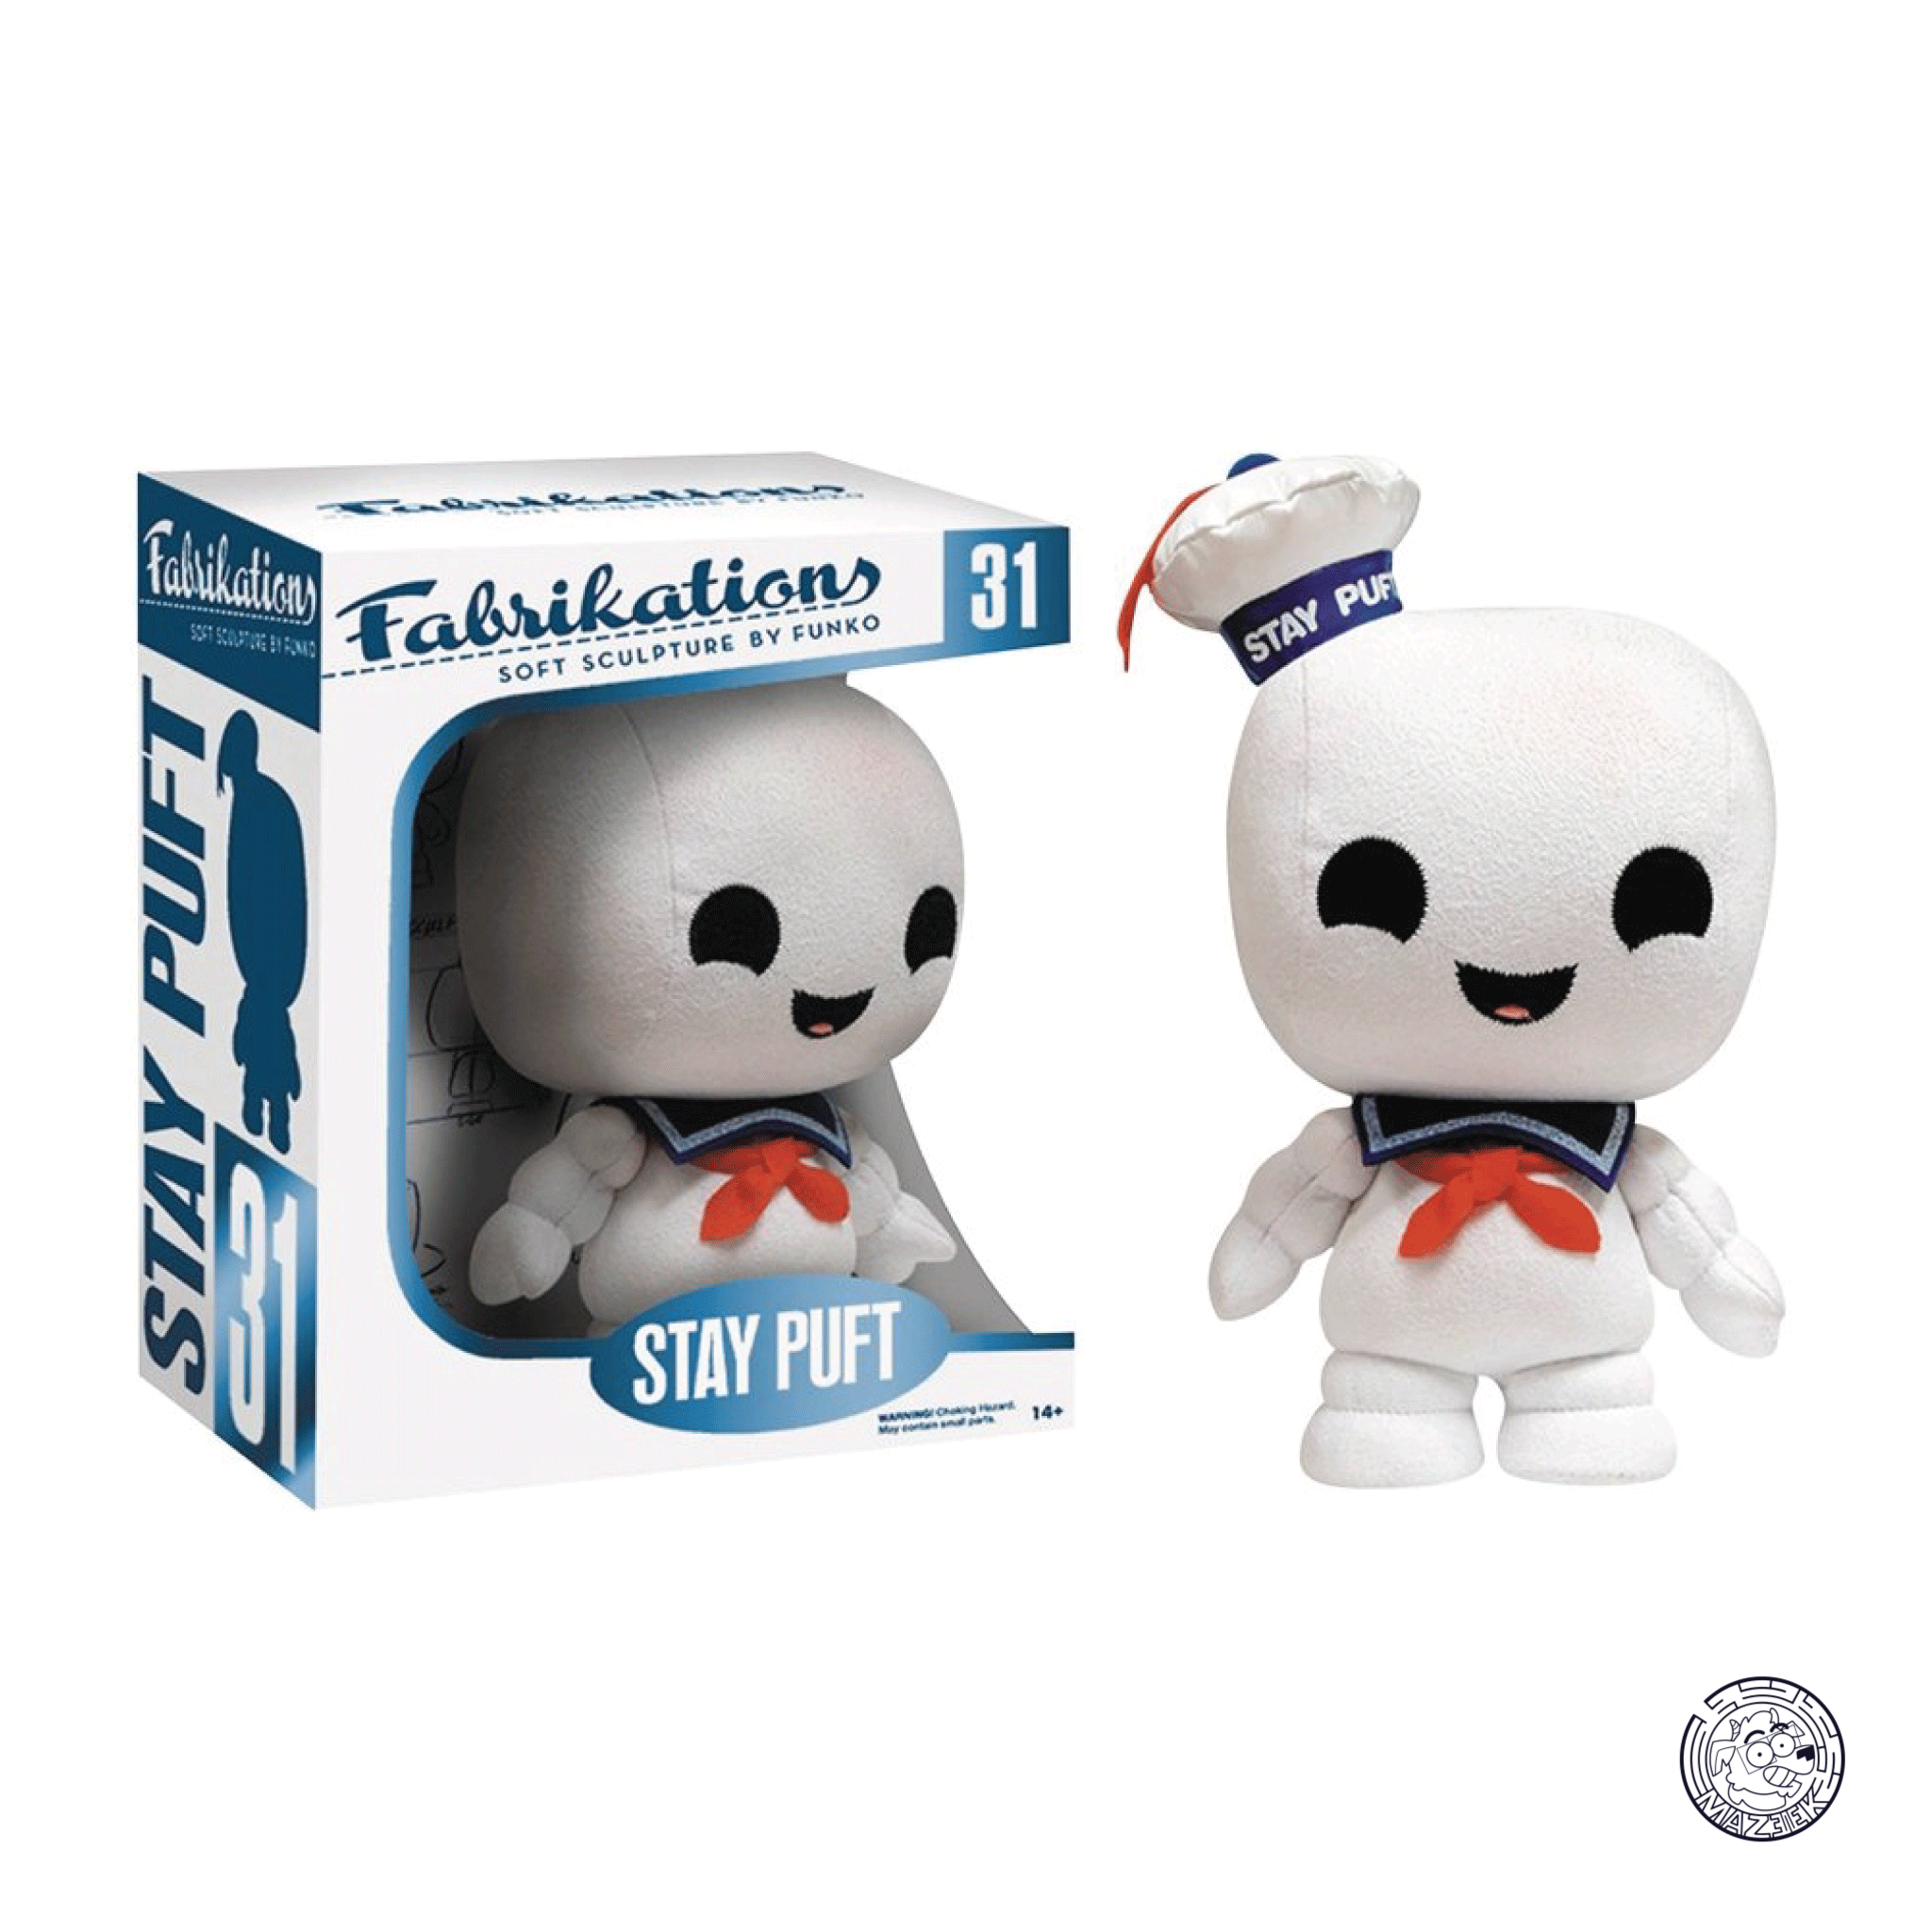 Funko Fabrikations! Ghostbusters: Stay Puft 31